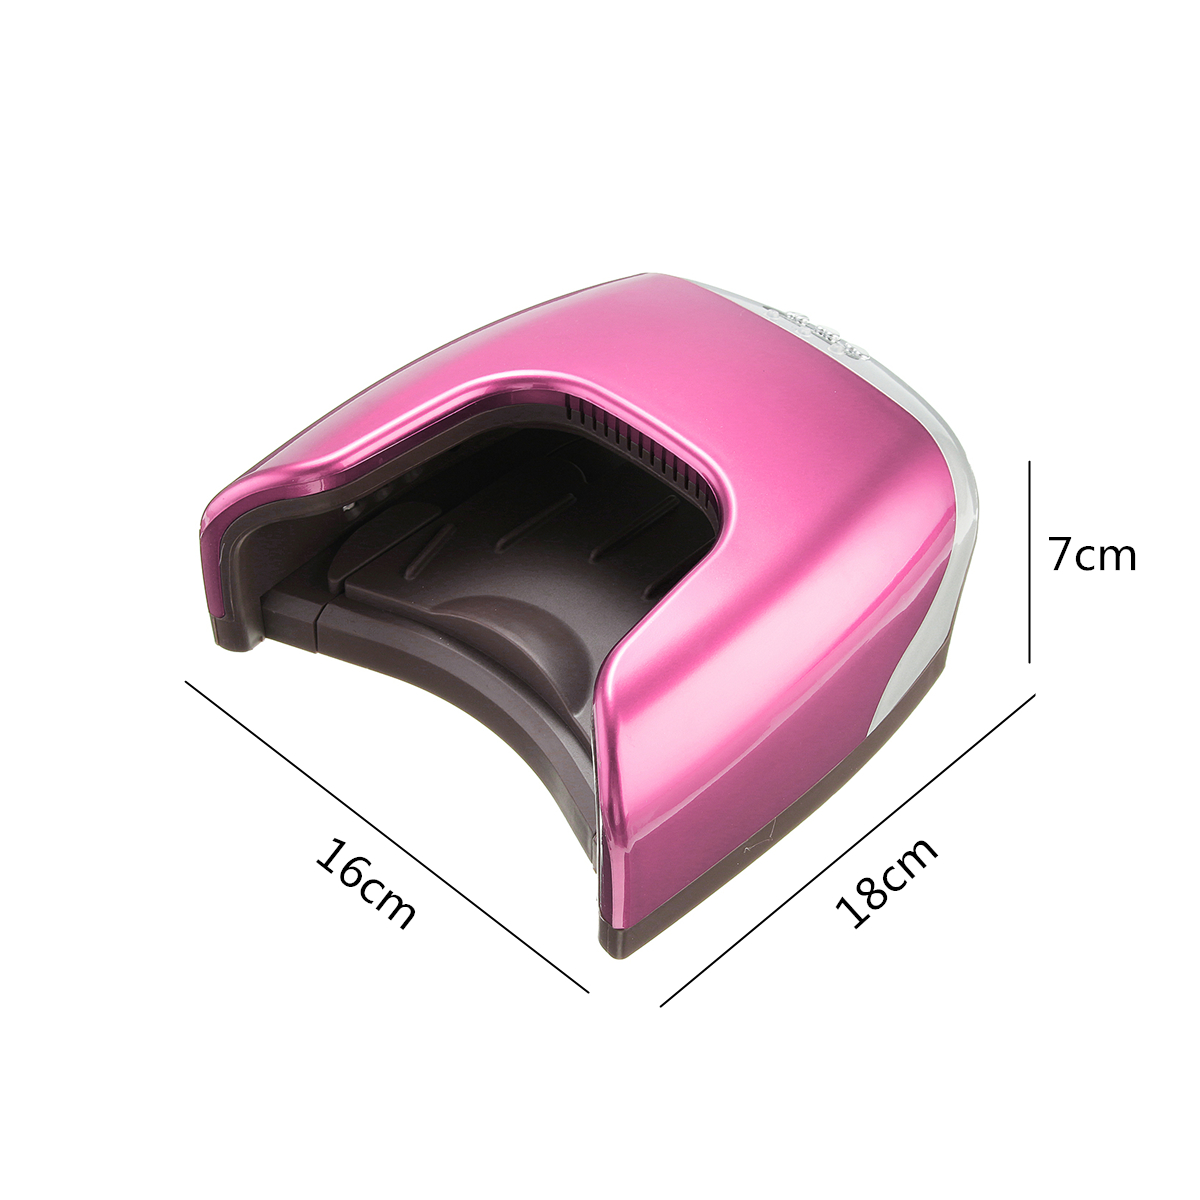 UV-Gel-Polish-LED-Nail-Lamp-Nail-Dryer-Curing-Light-with-Bottom-30s60s90s-Timer-LCD-Display-48W-1157031-11